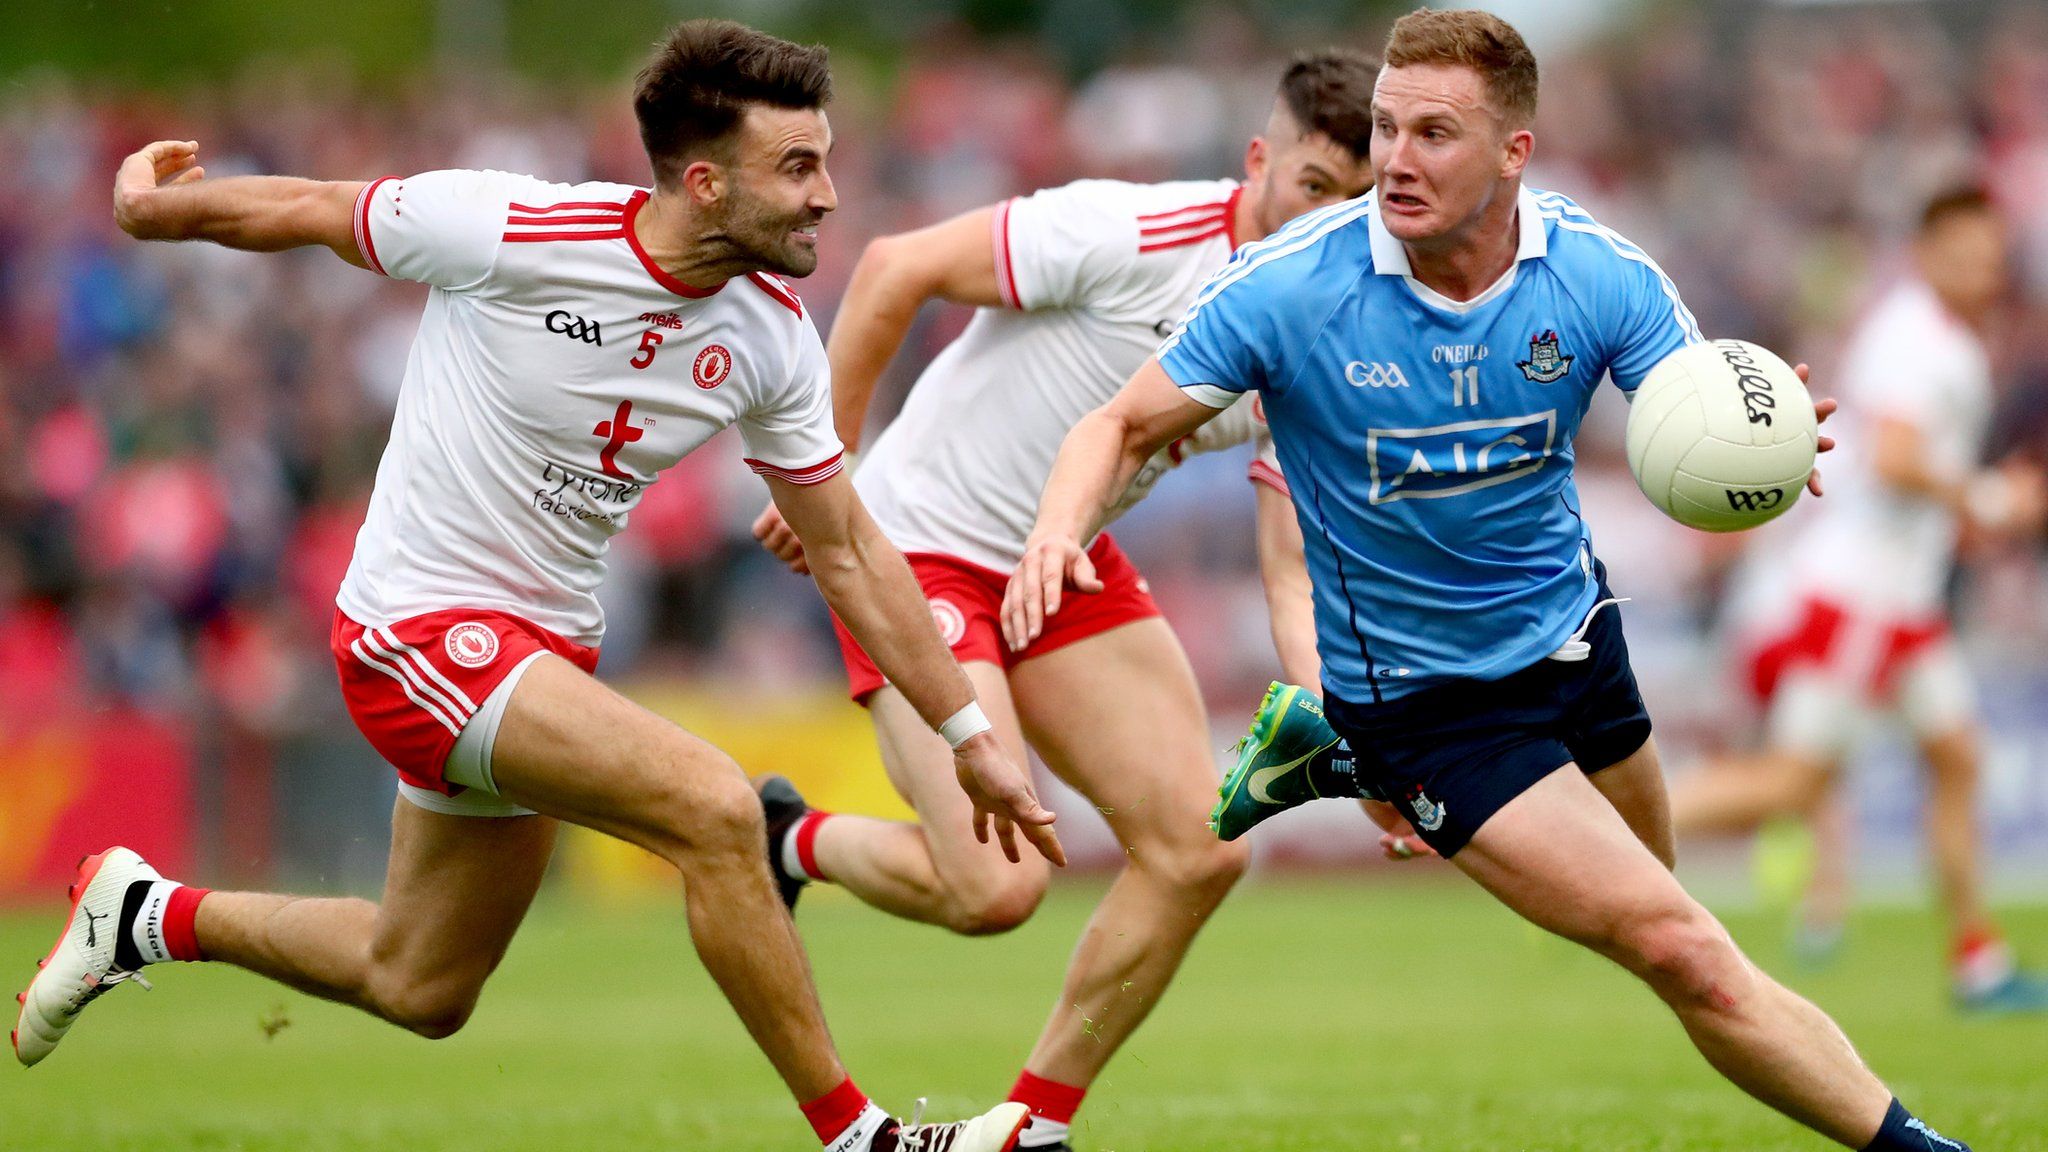 Action from Tyrone against Dublin